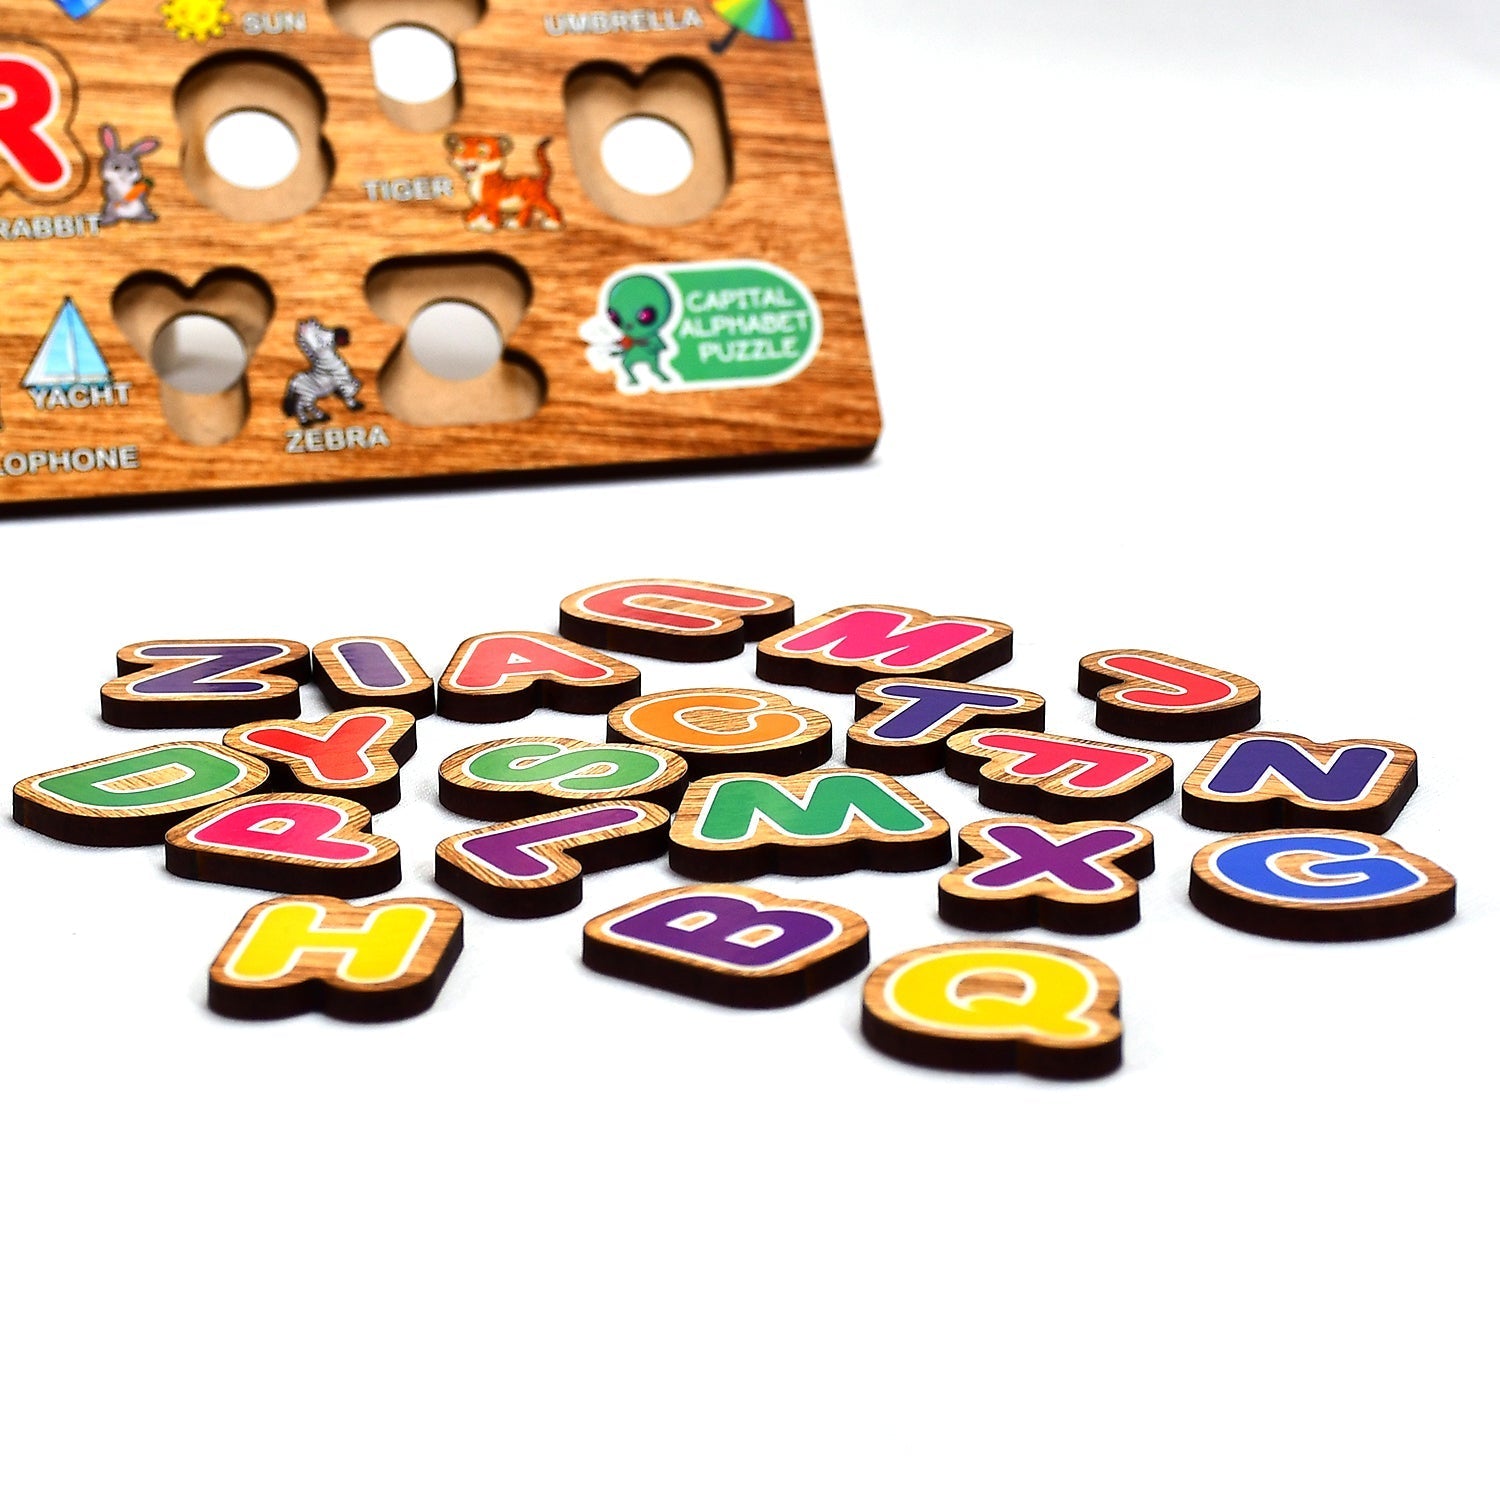 3495 Wooden Capital Alphabets Letters Learning Educational Puzzle Toy for Kids. Amd-Dukandaily